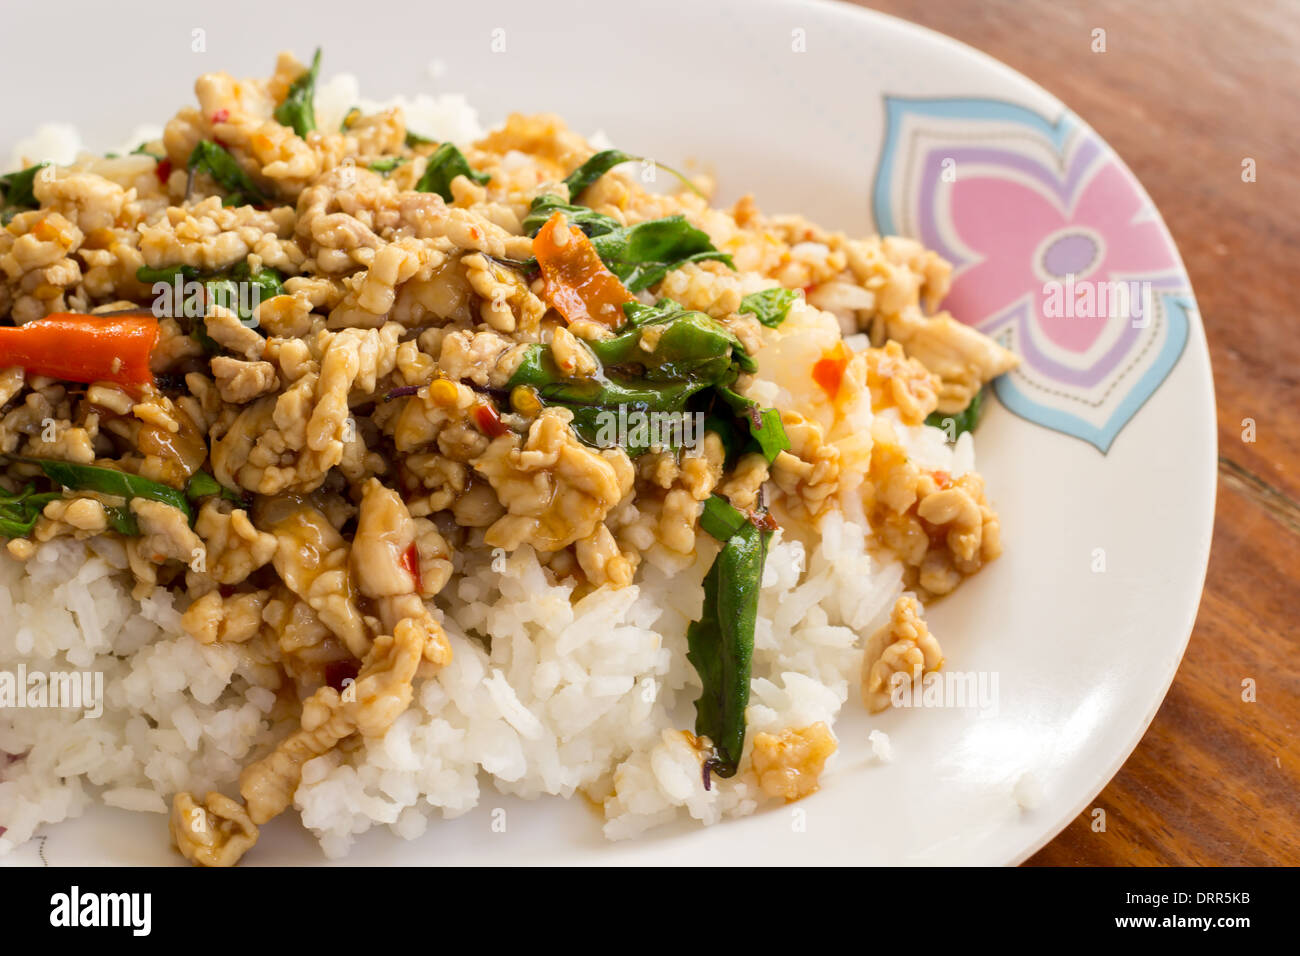 The Fried rice with basil on a white plate on a wooden table. Stock Photo